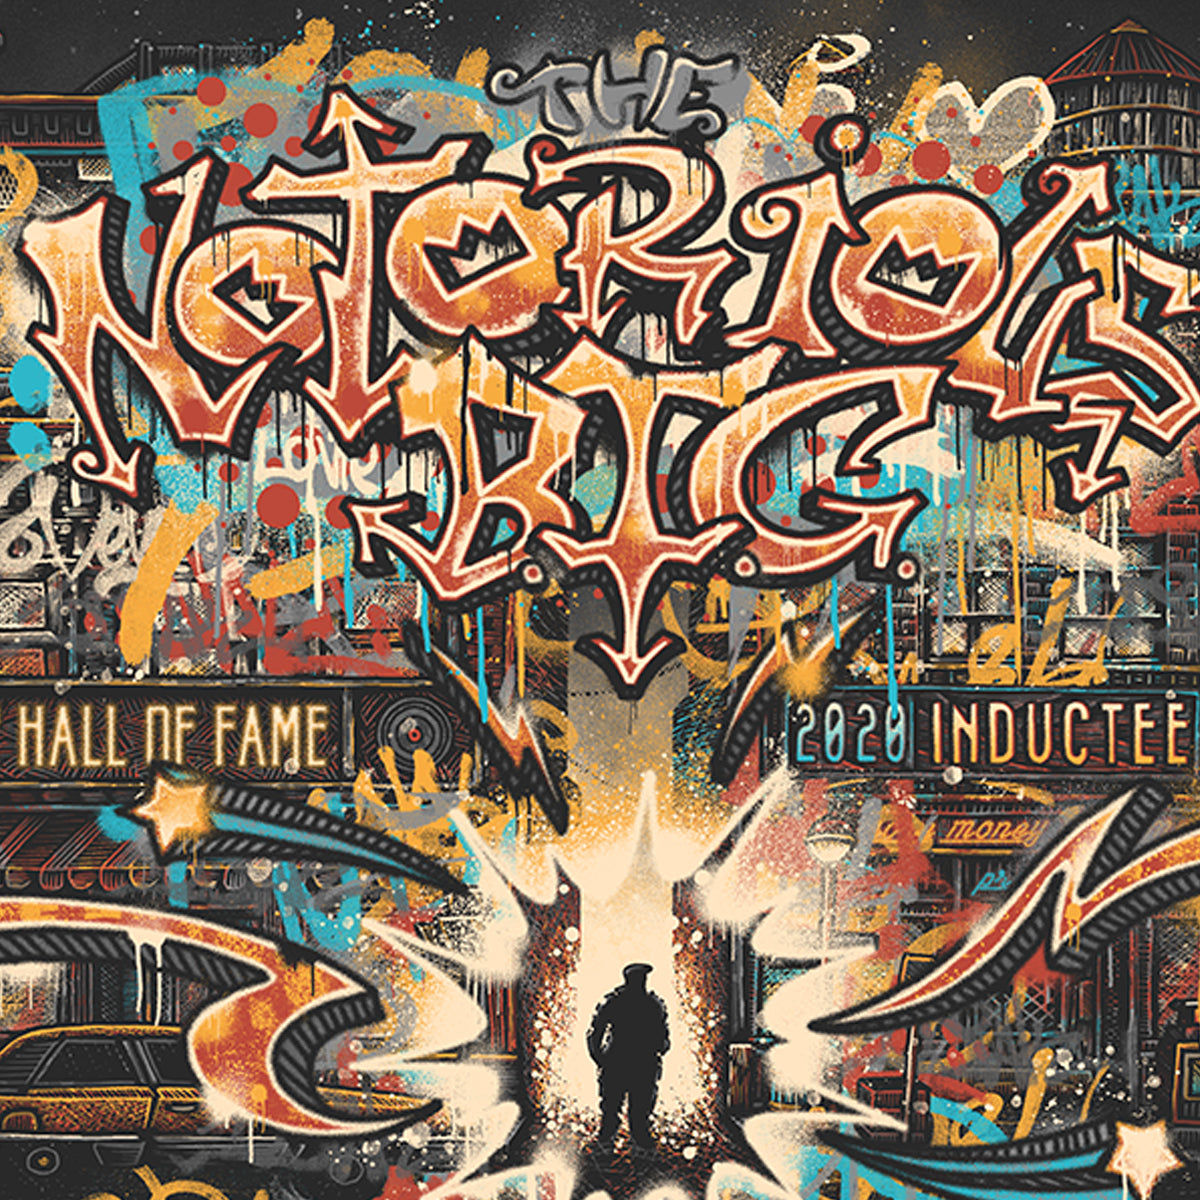 The Notorious B.I.G. Hall of Fame by Luke Martin (Variant Edition)